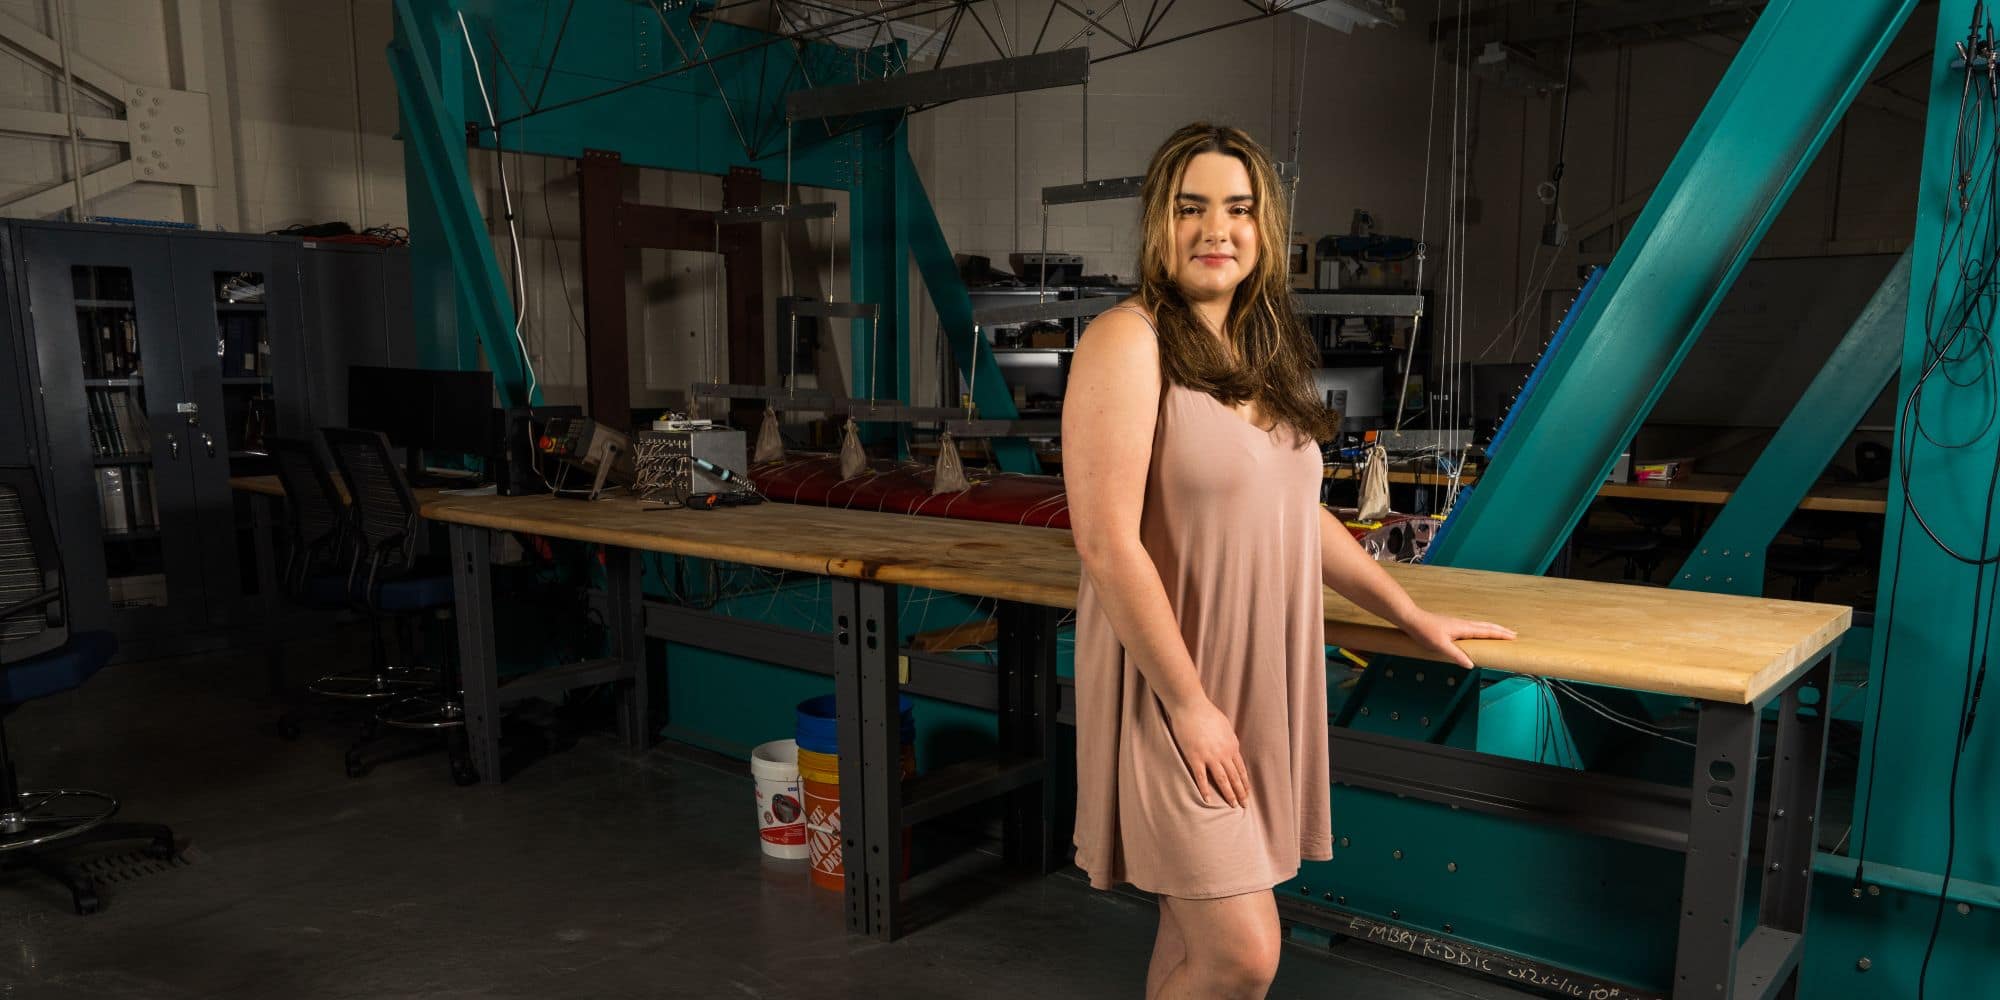 Boeing Scholar and Aerospace Engineering major Lainey Davis ('26) was drawn to Embry-Riddle's curriculum and accreditations. (Photo: Embry-Riddle / Bill Fredette-Huffman)